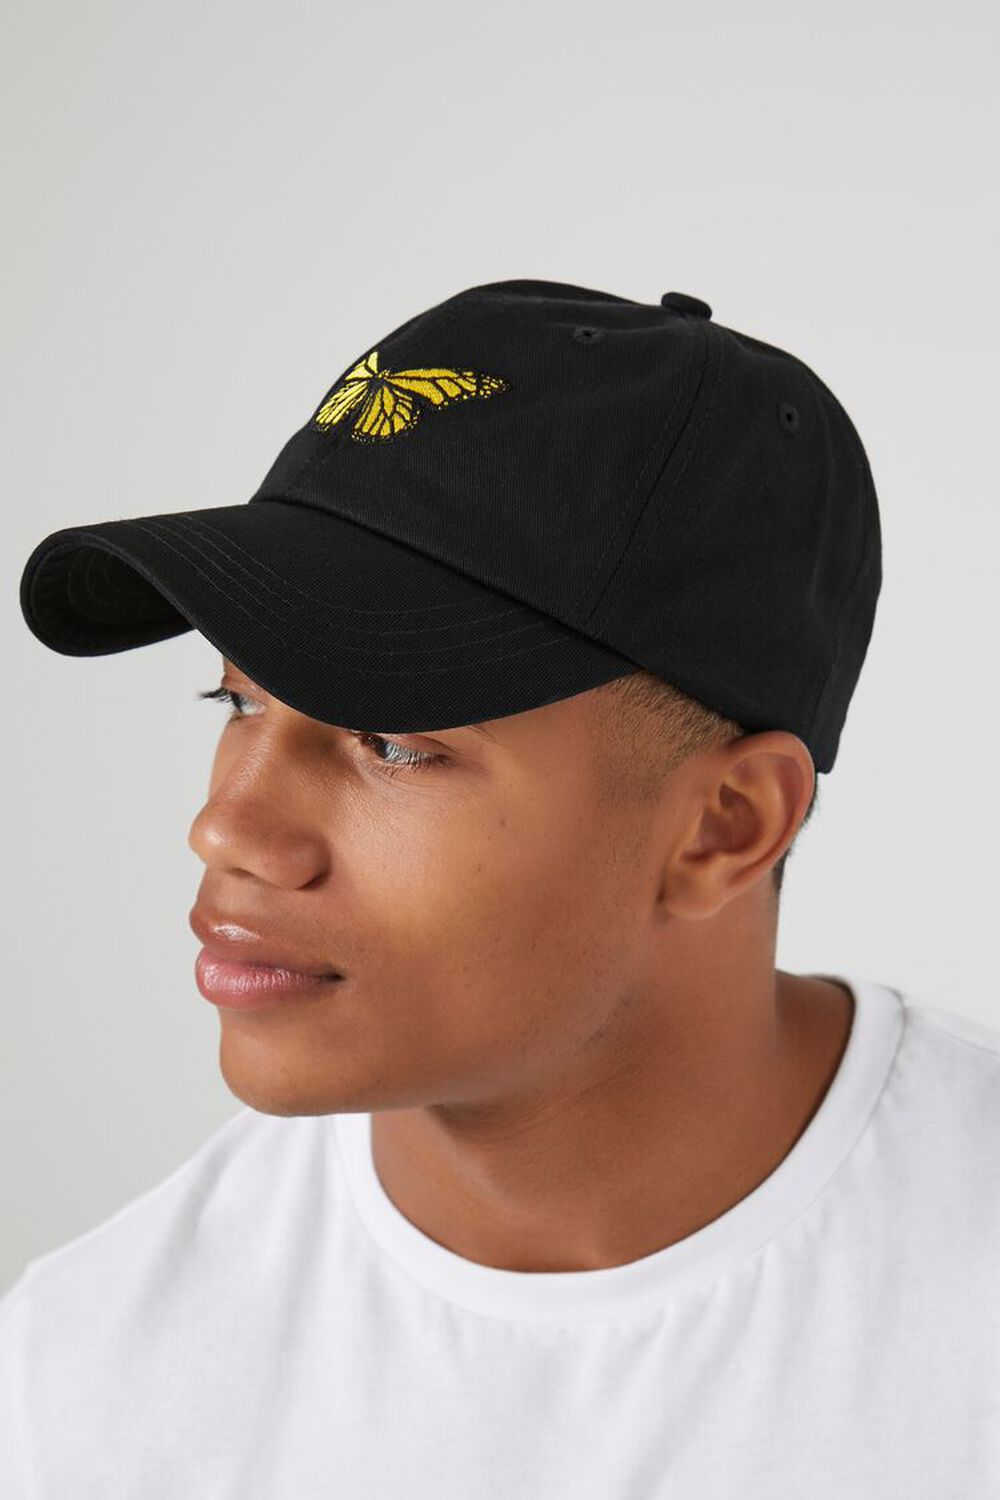 BLACK/YELLOW Butterfly Embroidered Graphic Dad Cap, image 2